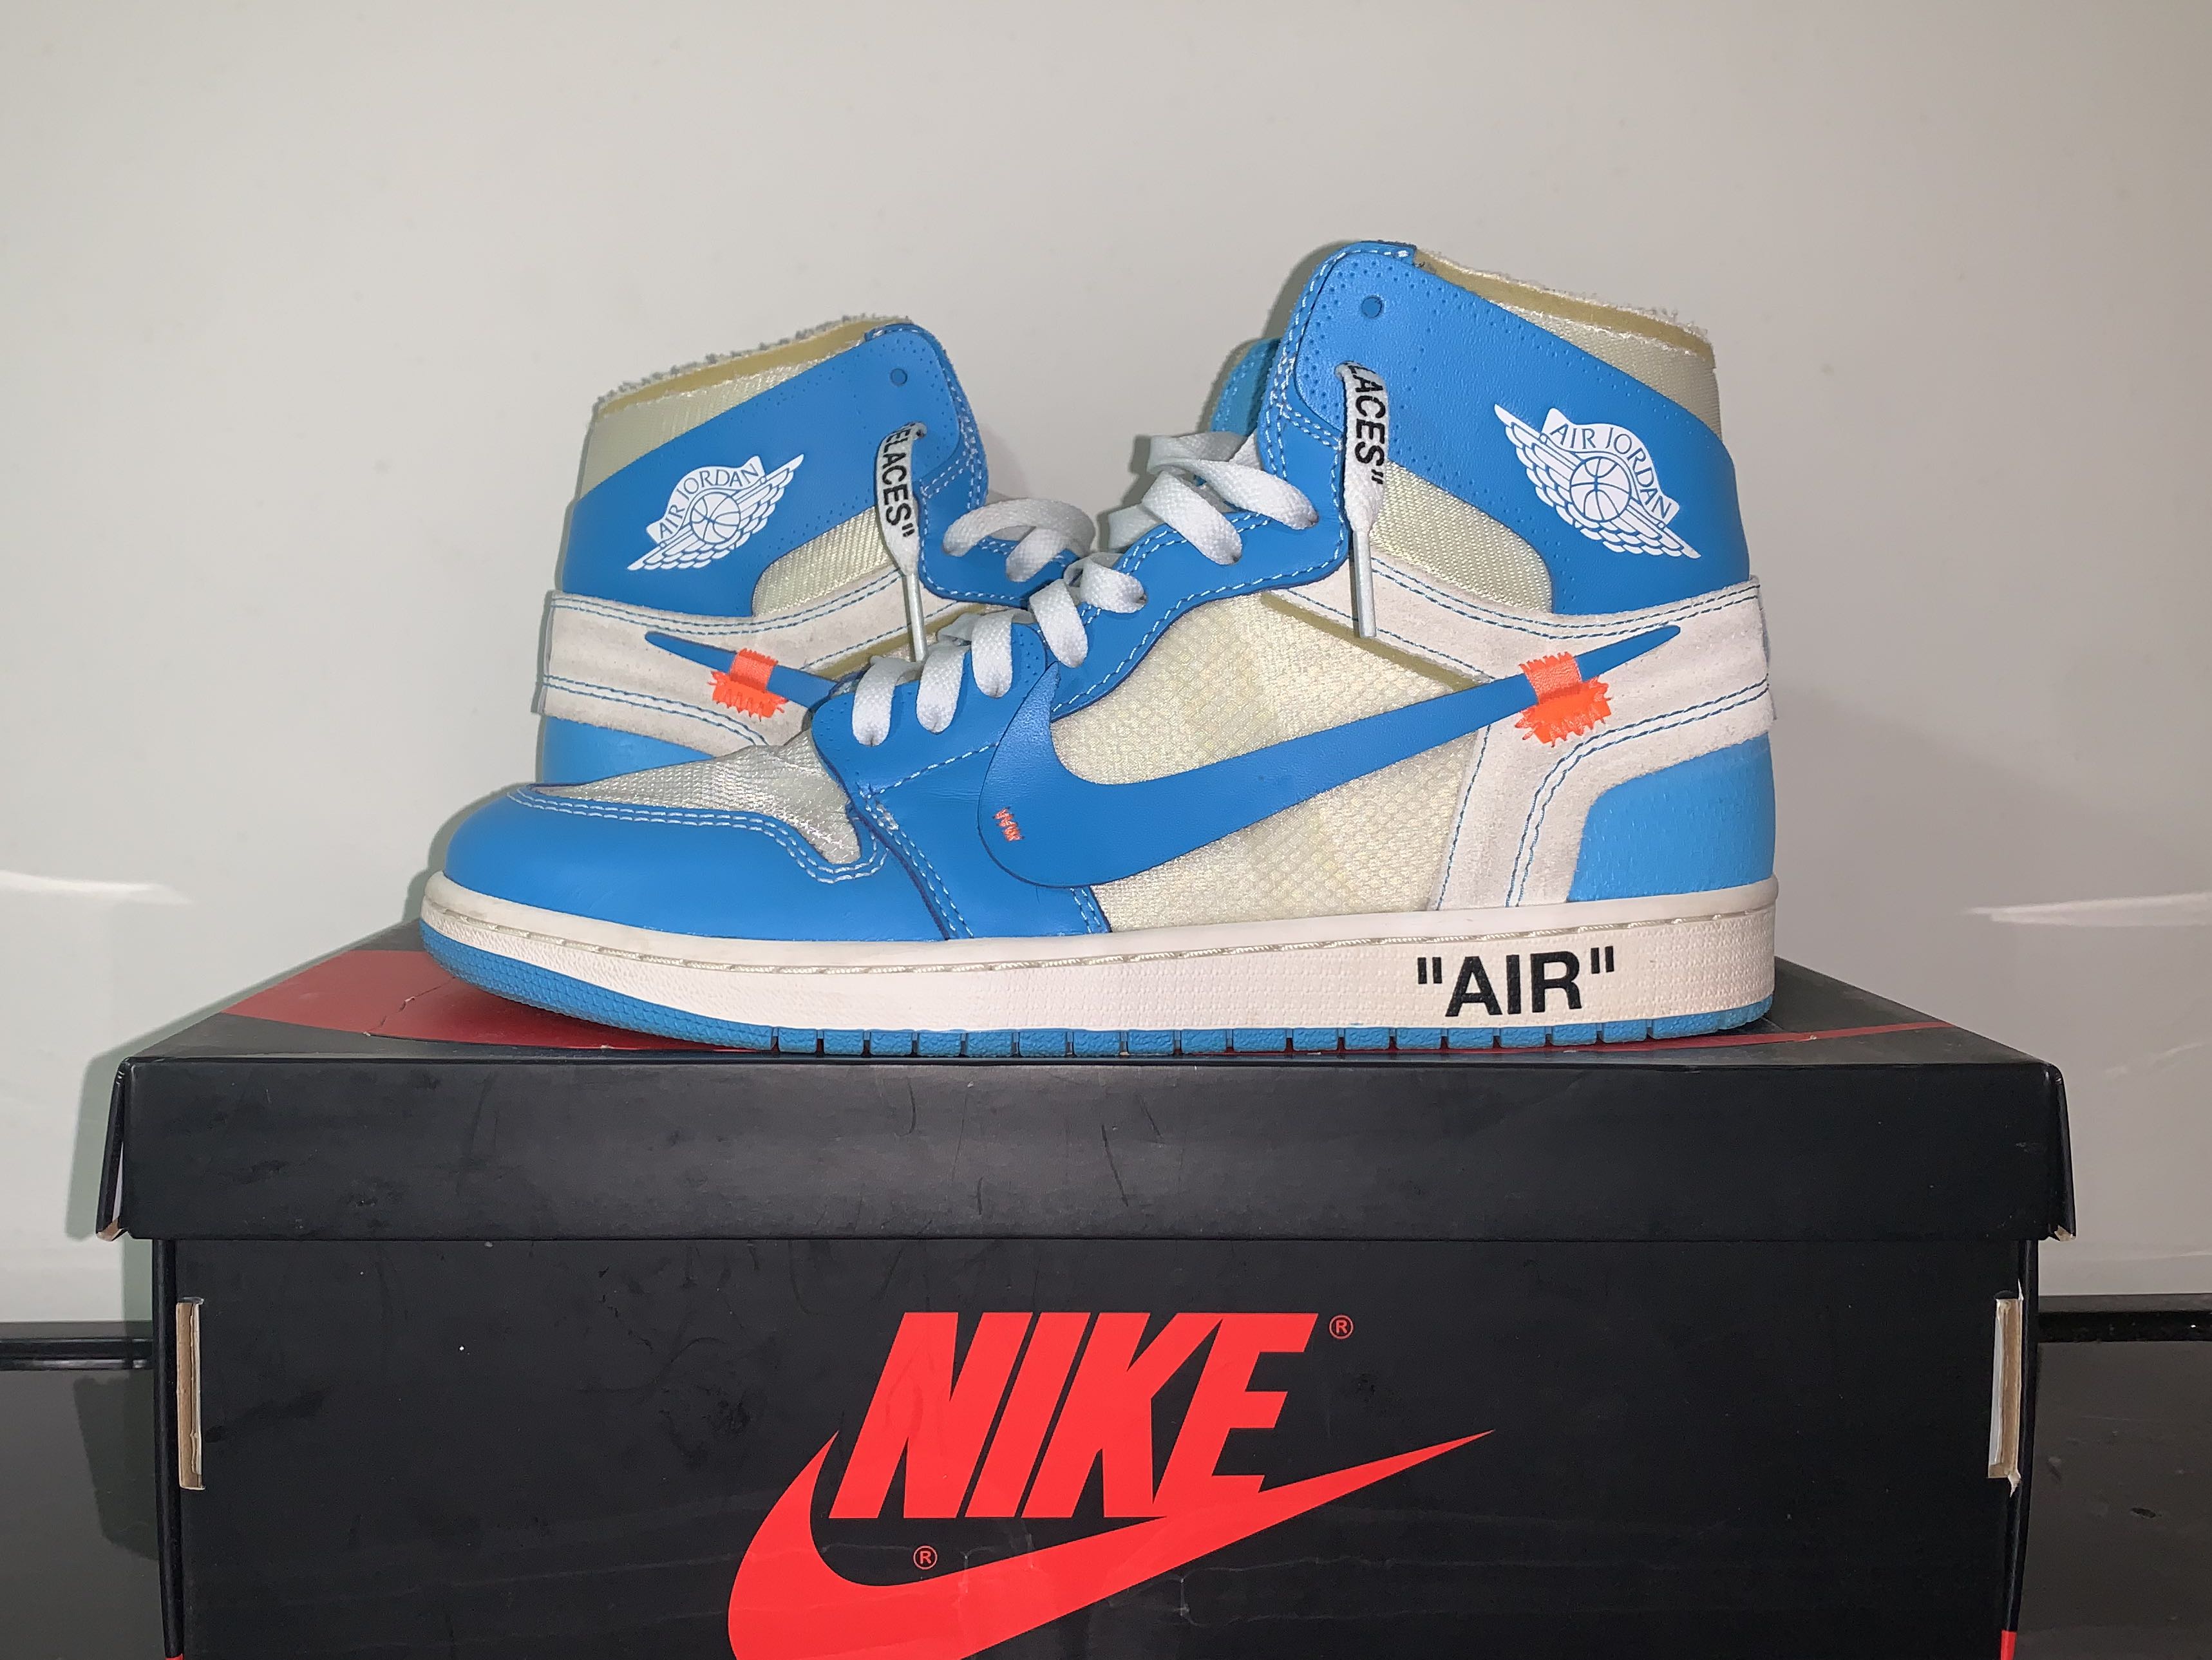 J1 High Offwhite UNC(TopGrade)not legit, Men's Fashion, Footwear, Sneakers  on Carousell